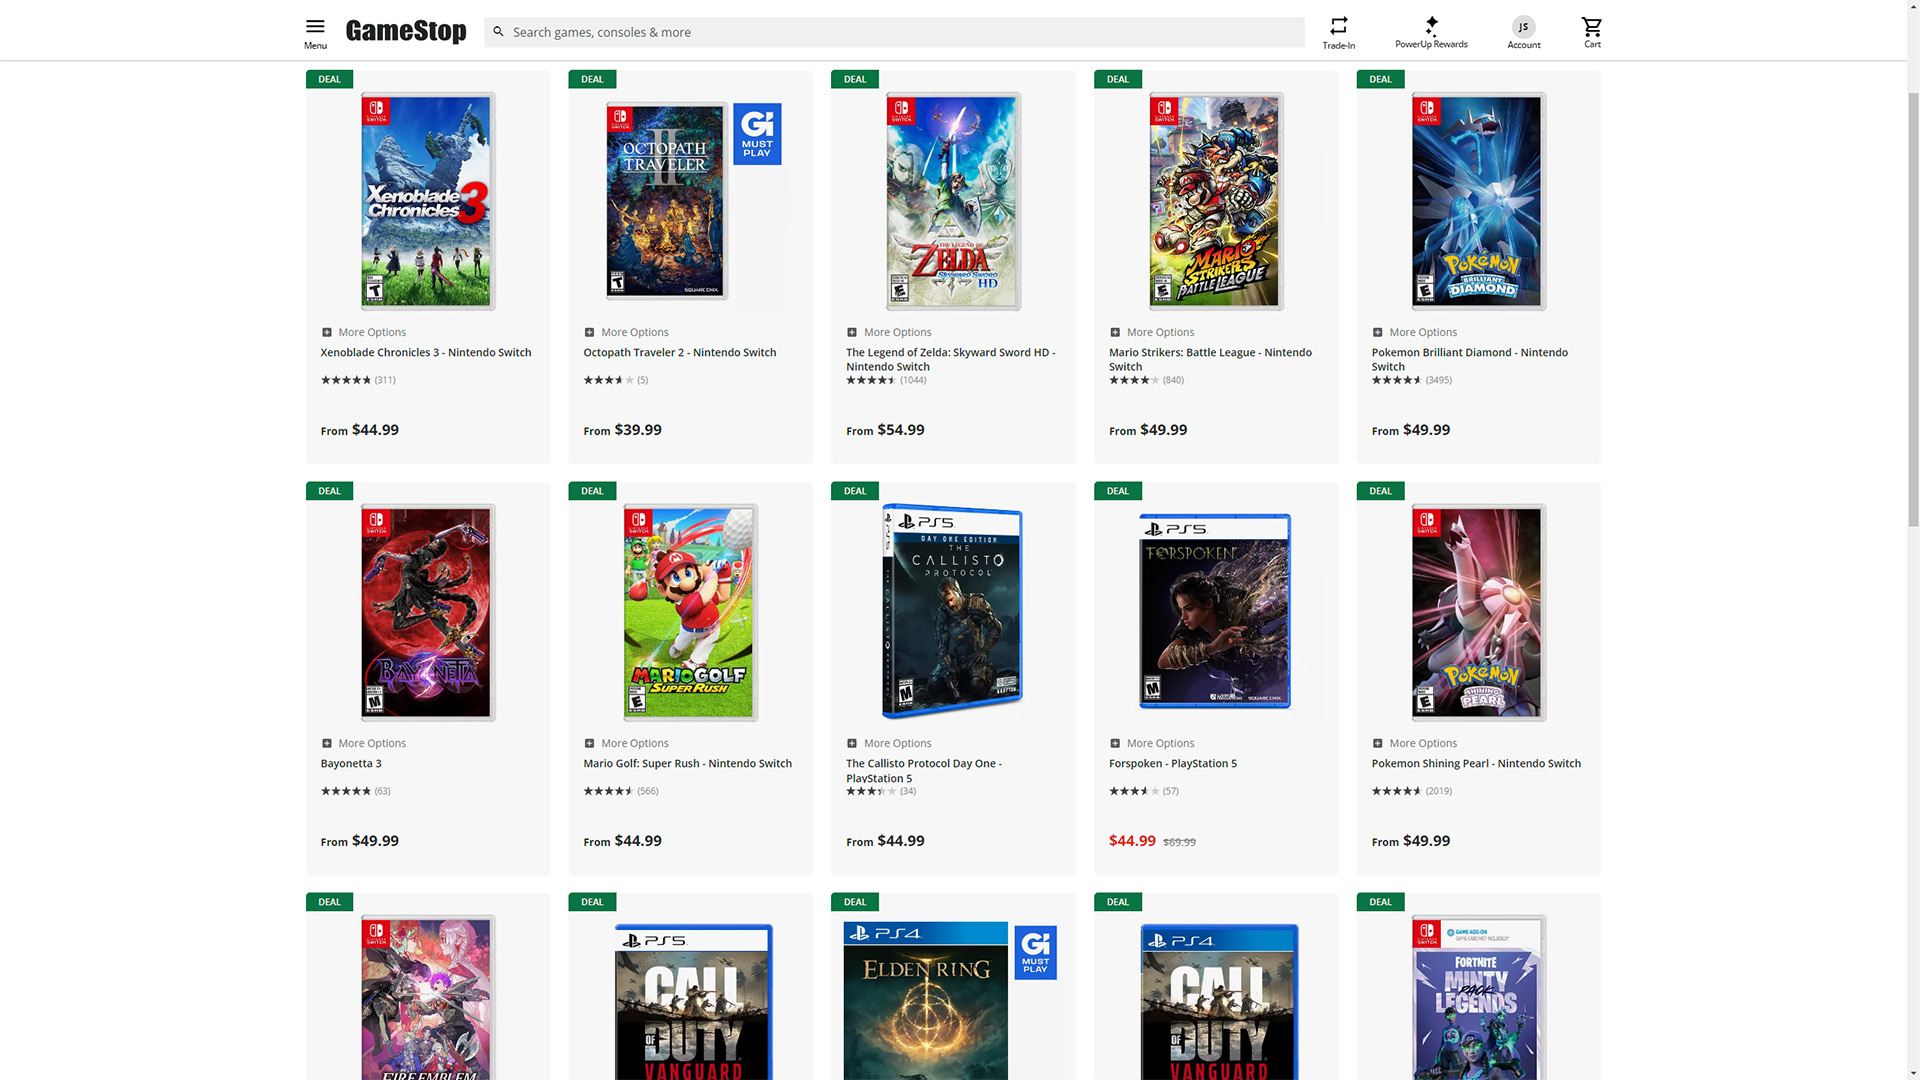 GameStop has a Buy One, Get One Free promotion on select games